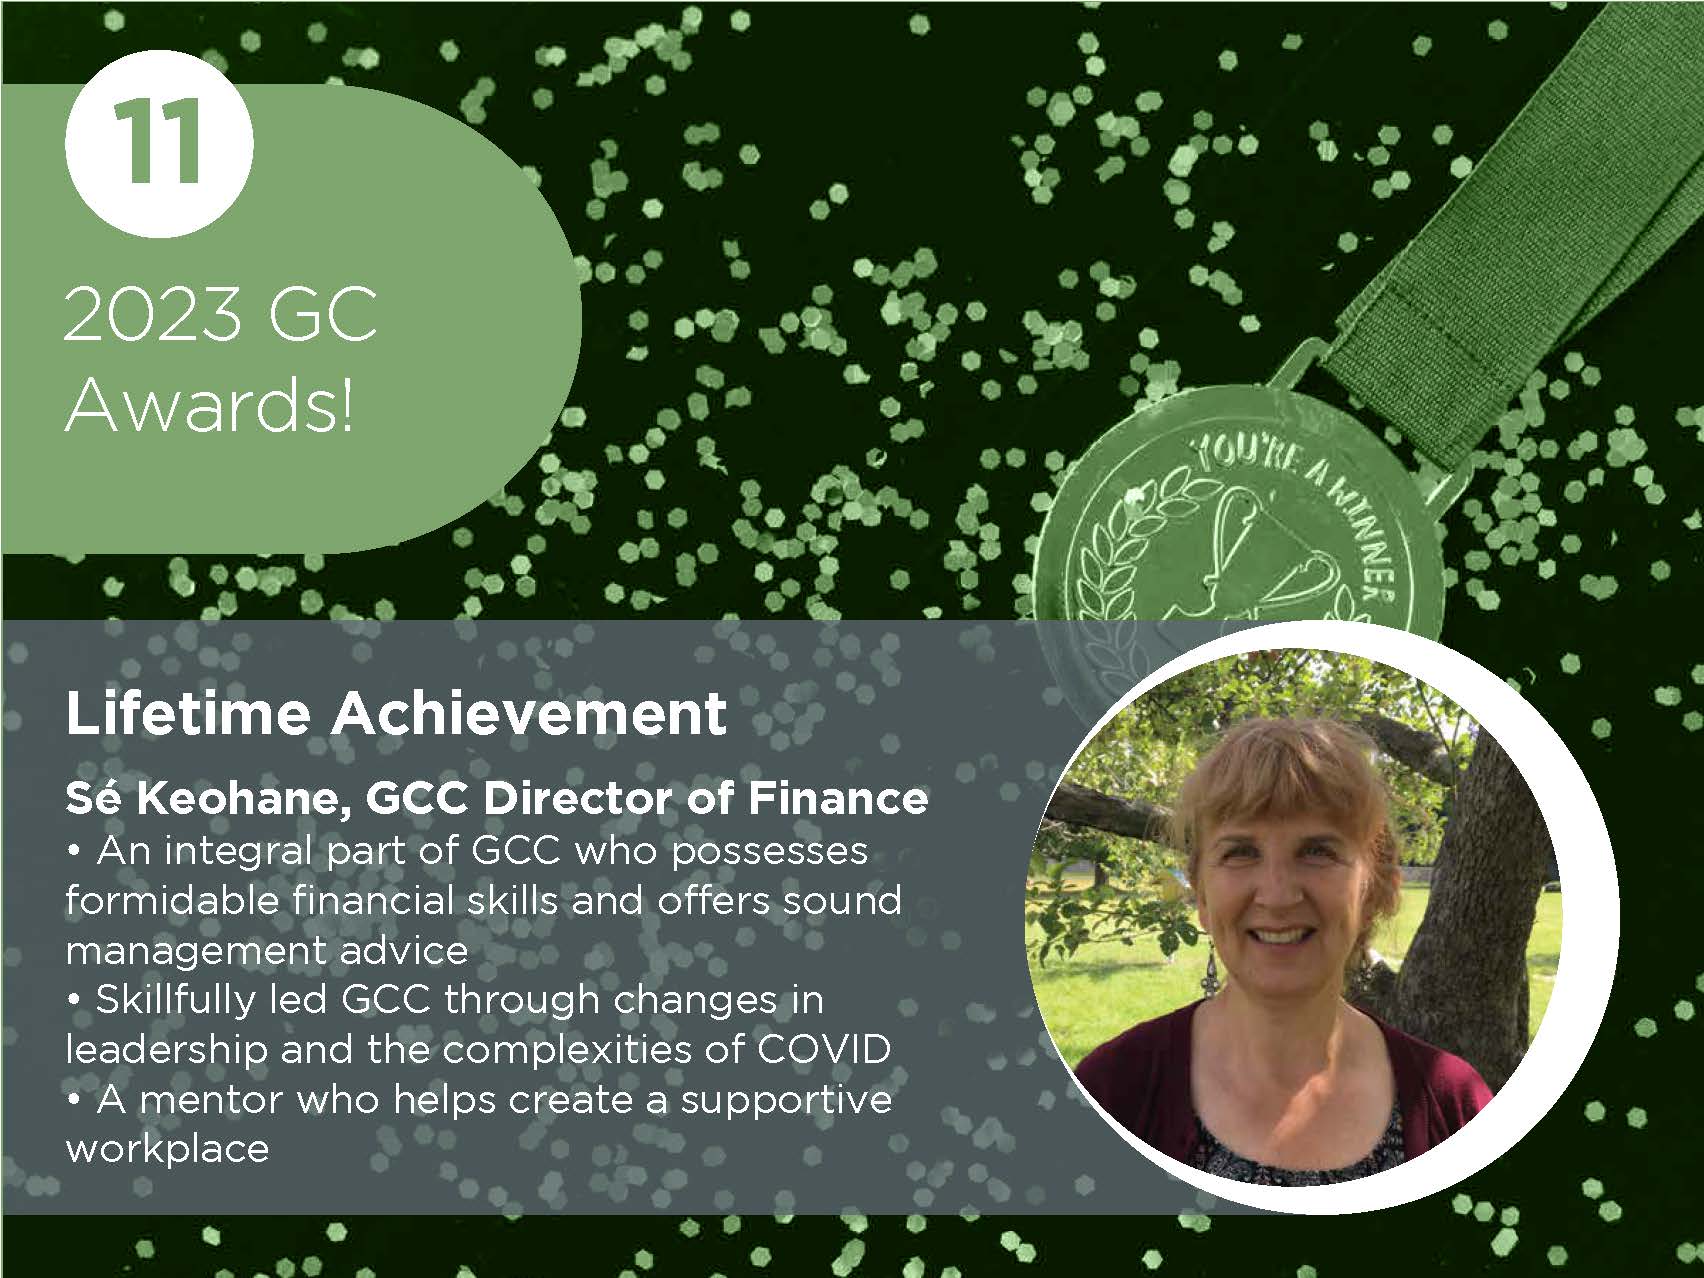 Lifetime Achievement Sé Keohane, GCC Director of Finance • An integral part of GCC who possesses formidable financial skills and offers sound management advice • Skillfully led GCC through changes in leadership and the complexities of COVID • A mentor who helps create a supportive workplace